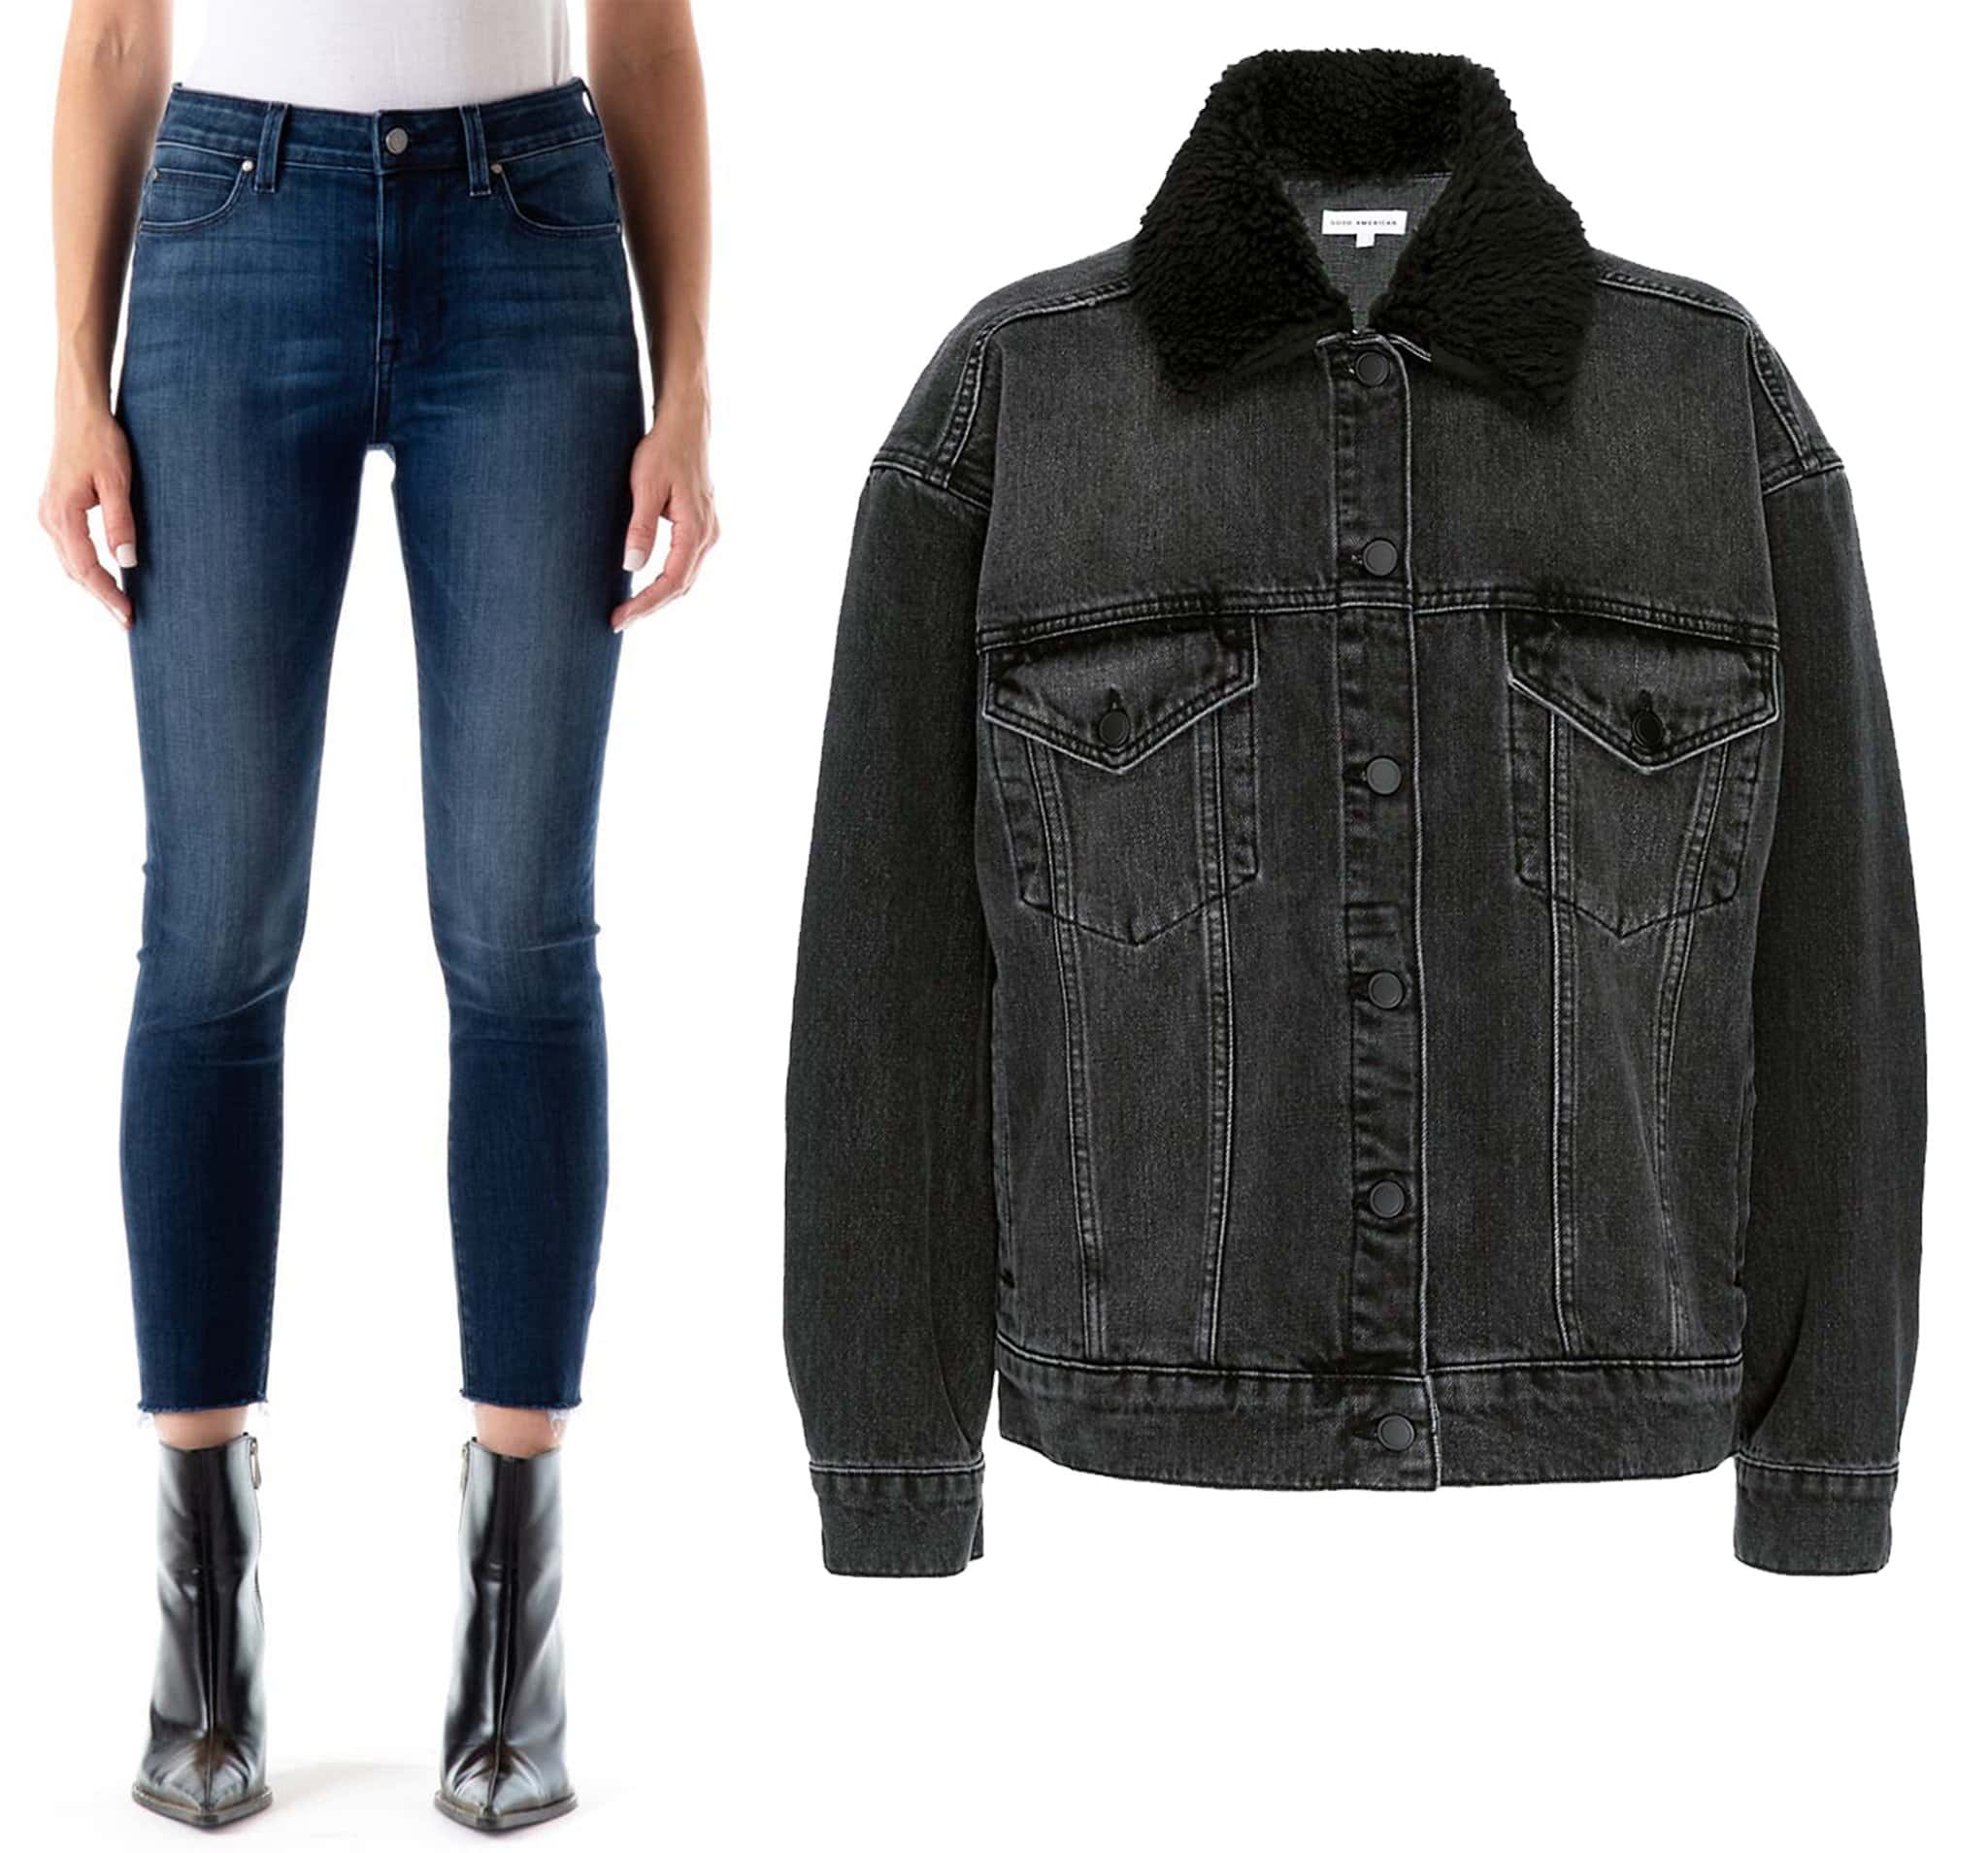 Sleek and Stylish: Fidelity Denim's Gwen High Waist Crop Skinny Jeans paired with the Good American Good Oversized Trucker Jacket, showcasing a trendy and flattering denim-on-denim look tailored for diverse body types